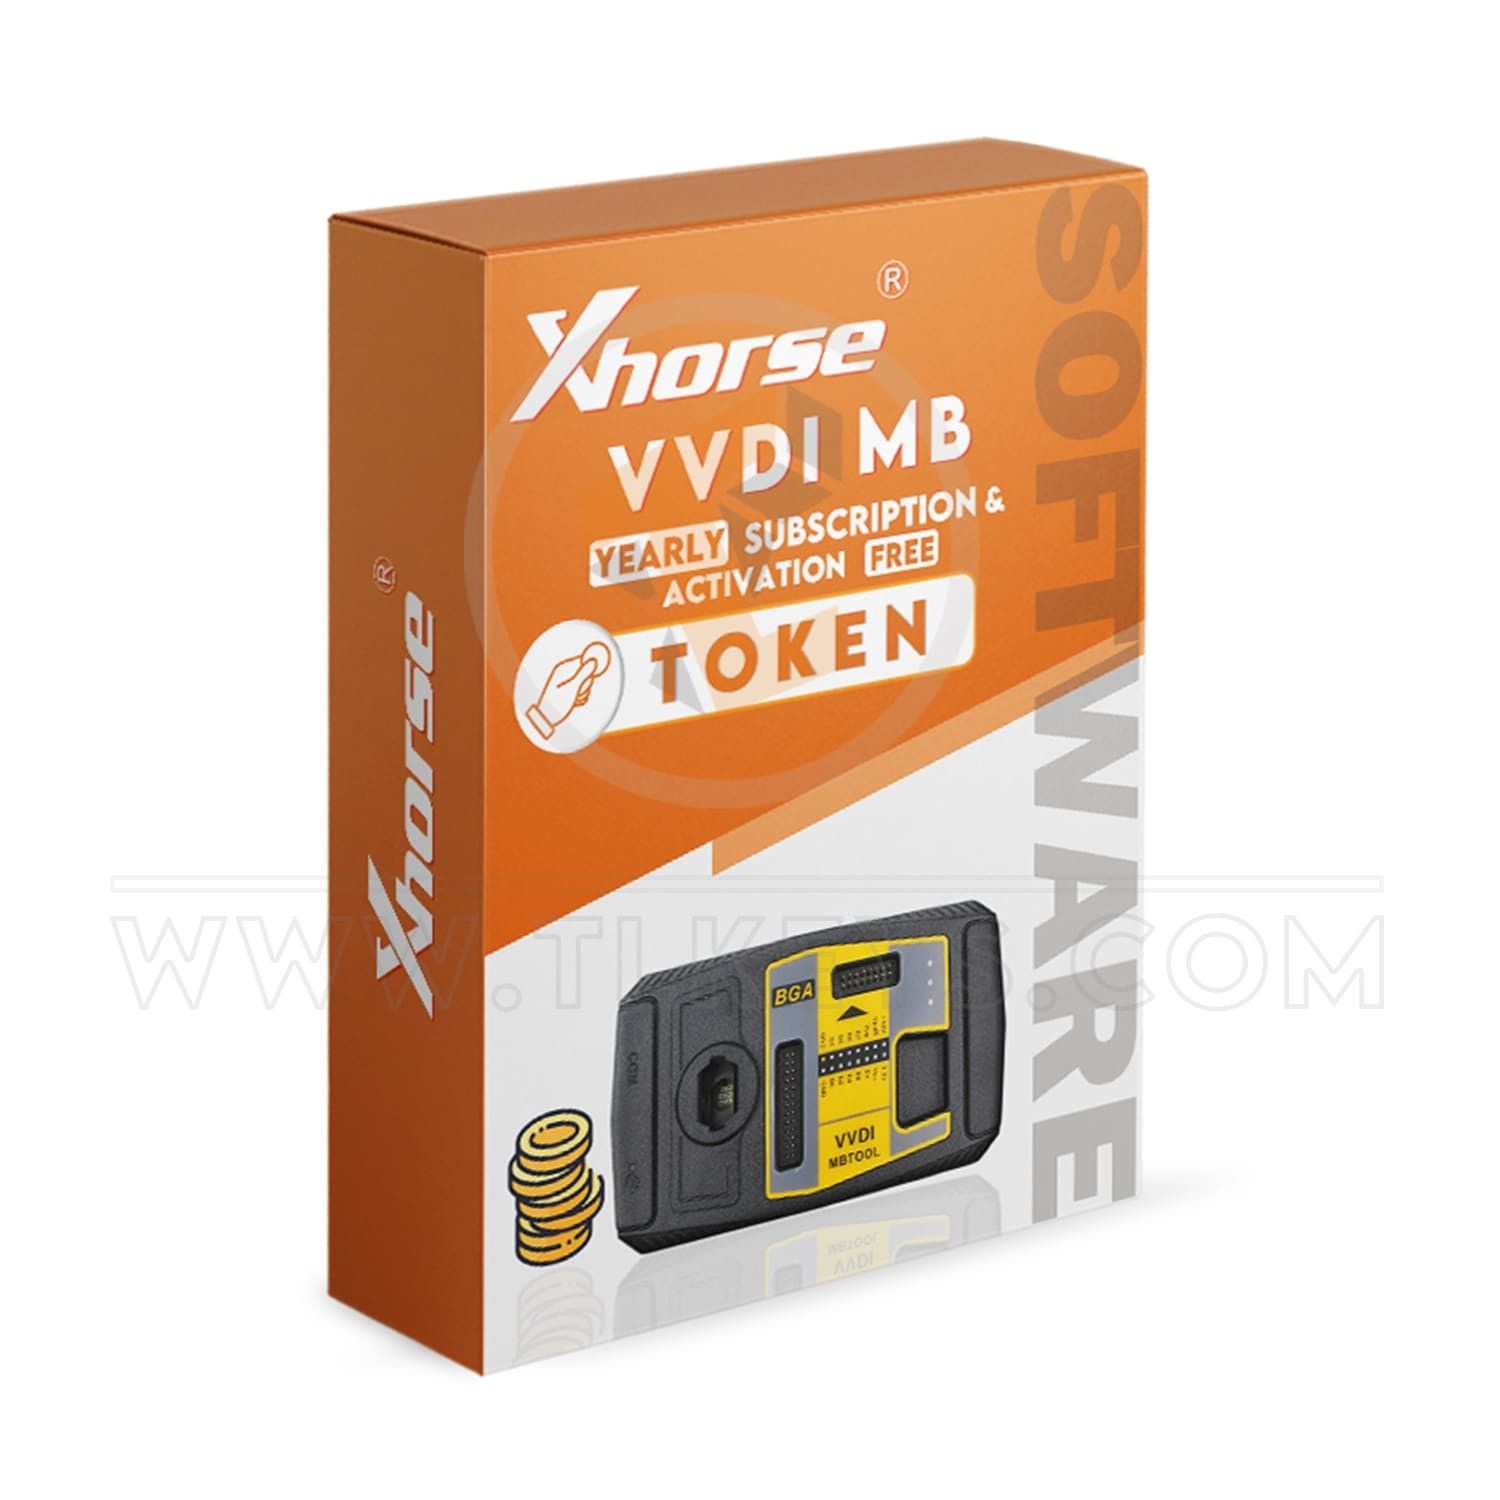 XHORSE VVDI MB Yearly Subscription And Activation Free Token token